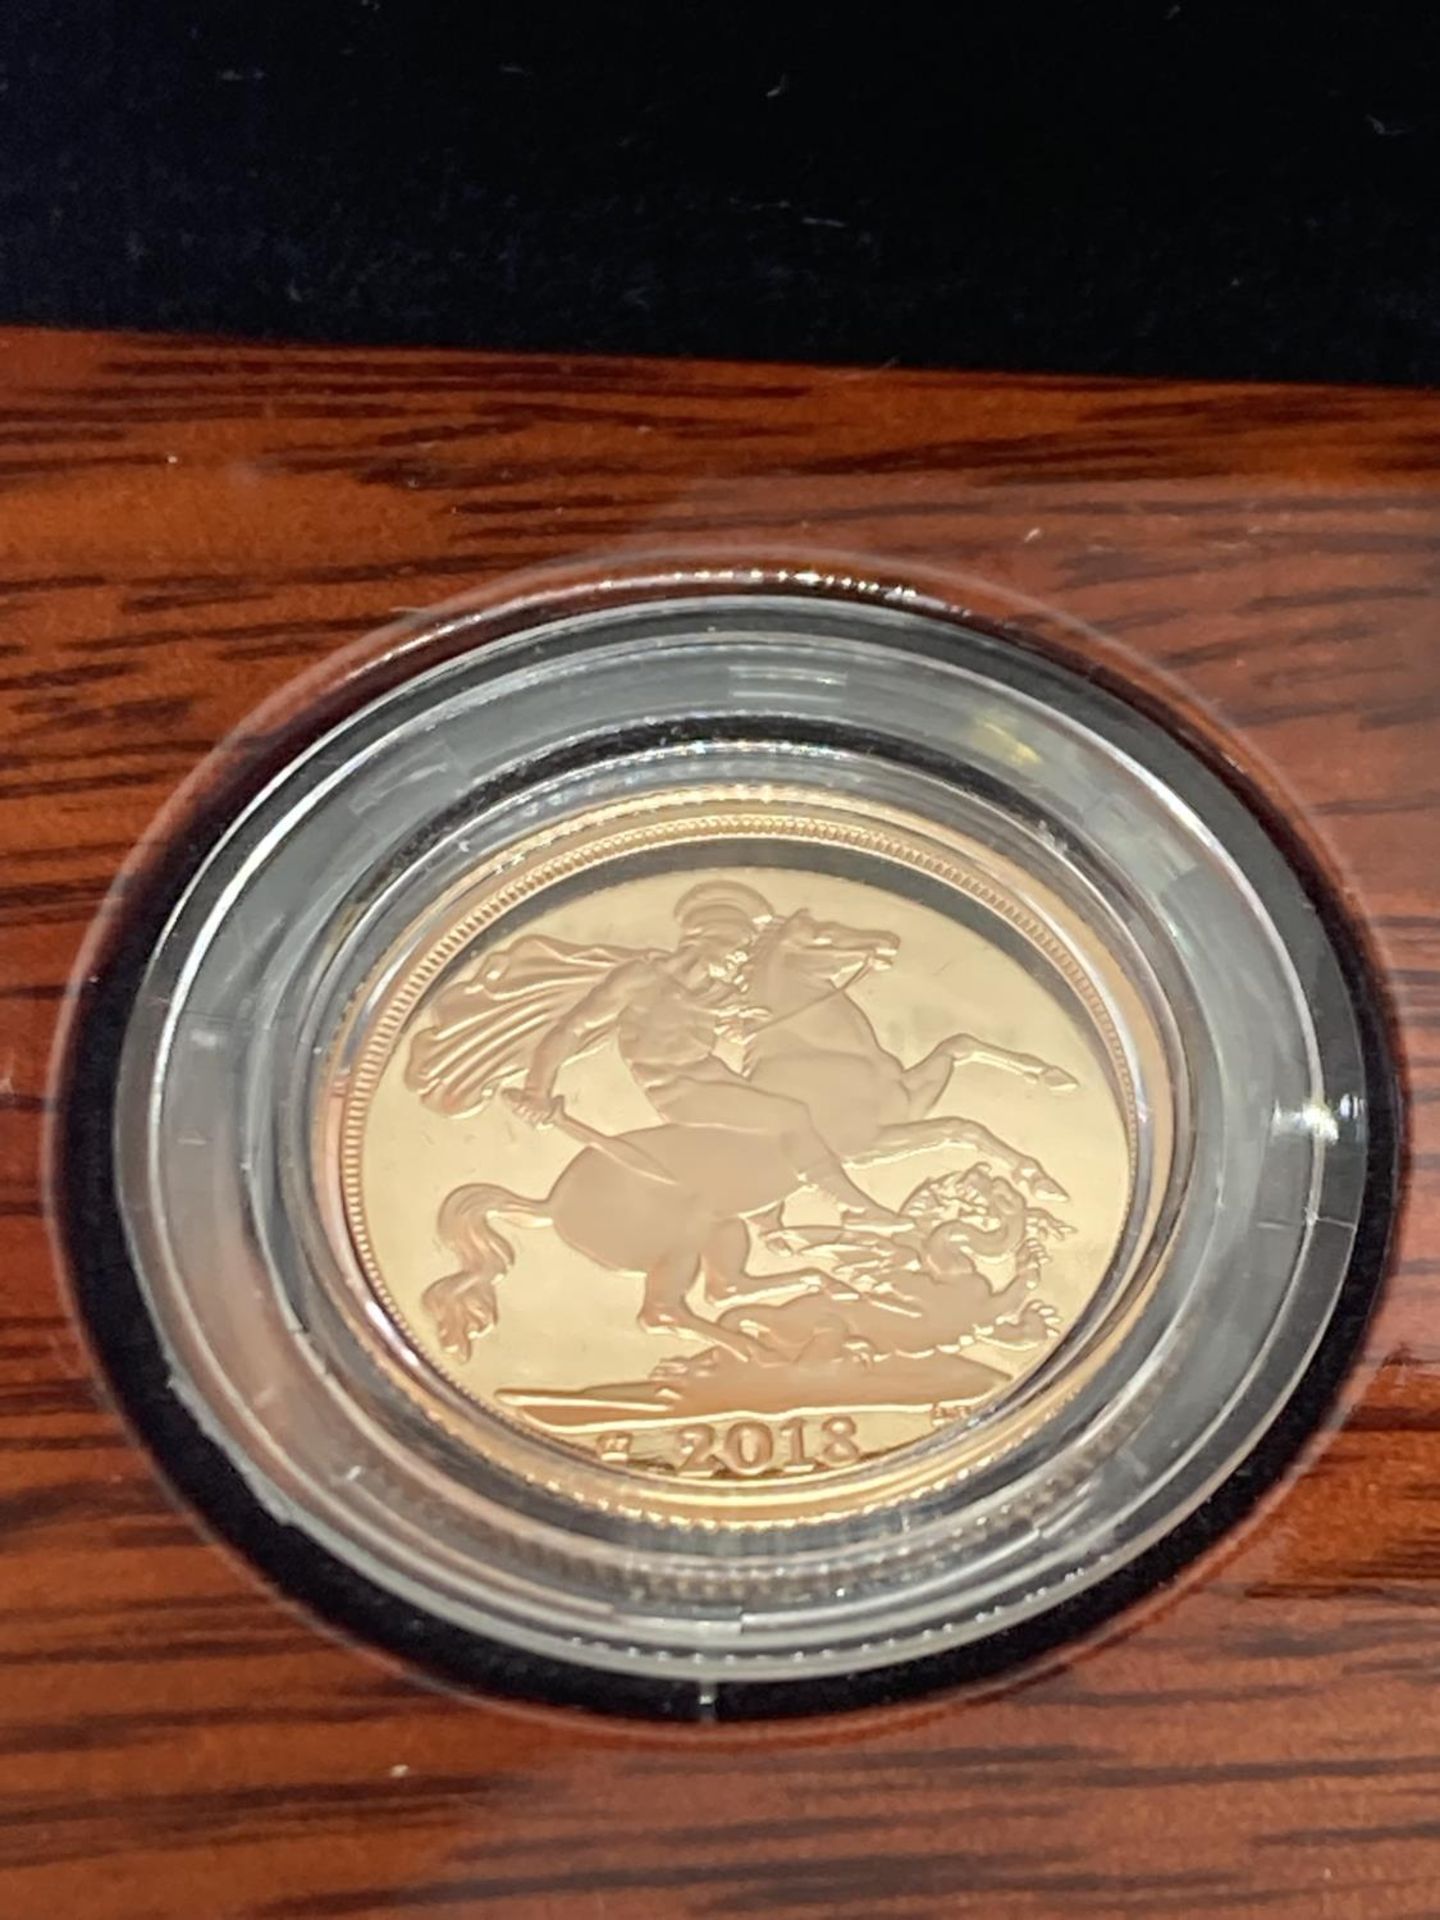 A 2018 THE SOVEREIGN GOLD PROOF LIMITED EDITION NUMBER 2,555 OF 10,500 IN A WOODEN BOXED CASE - Image 2 of 5